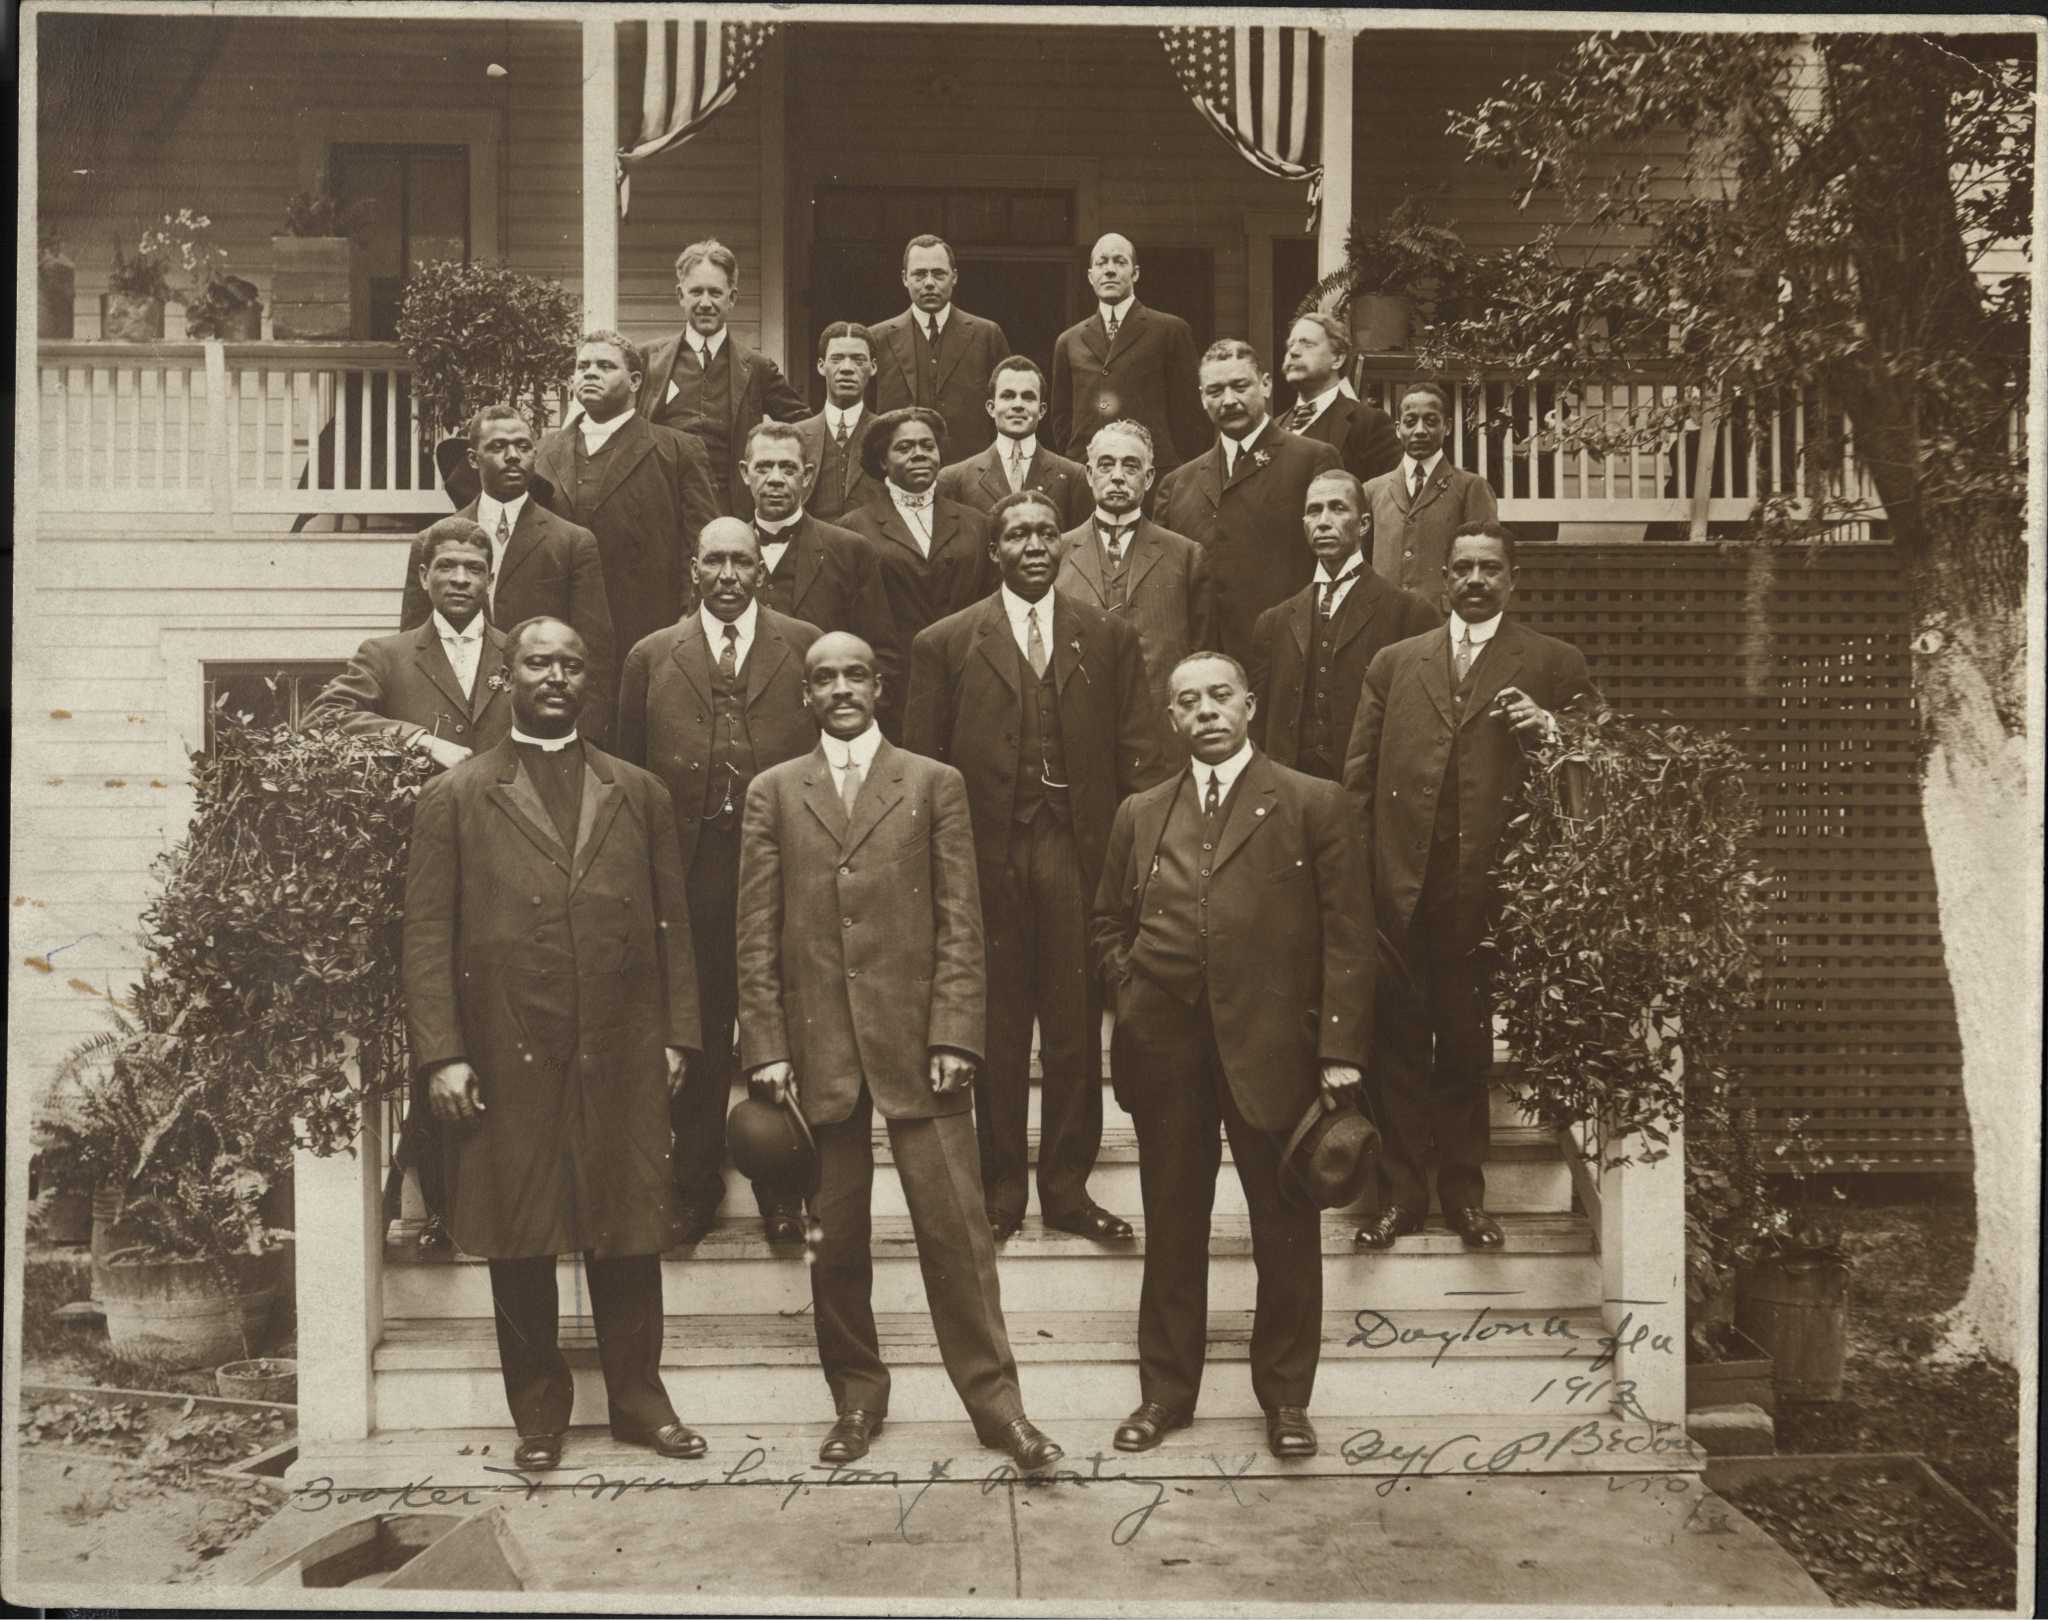 Photograph of Mary McLeod Bethune with Booker T. Washington (third row, second from left) during a visit to Daytona Institute